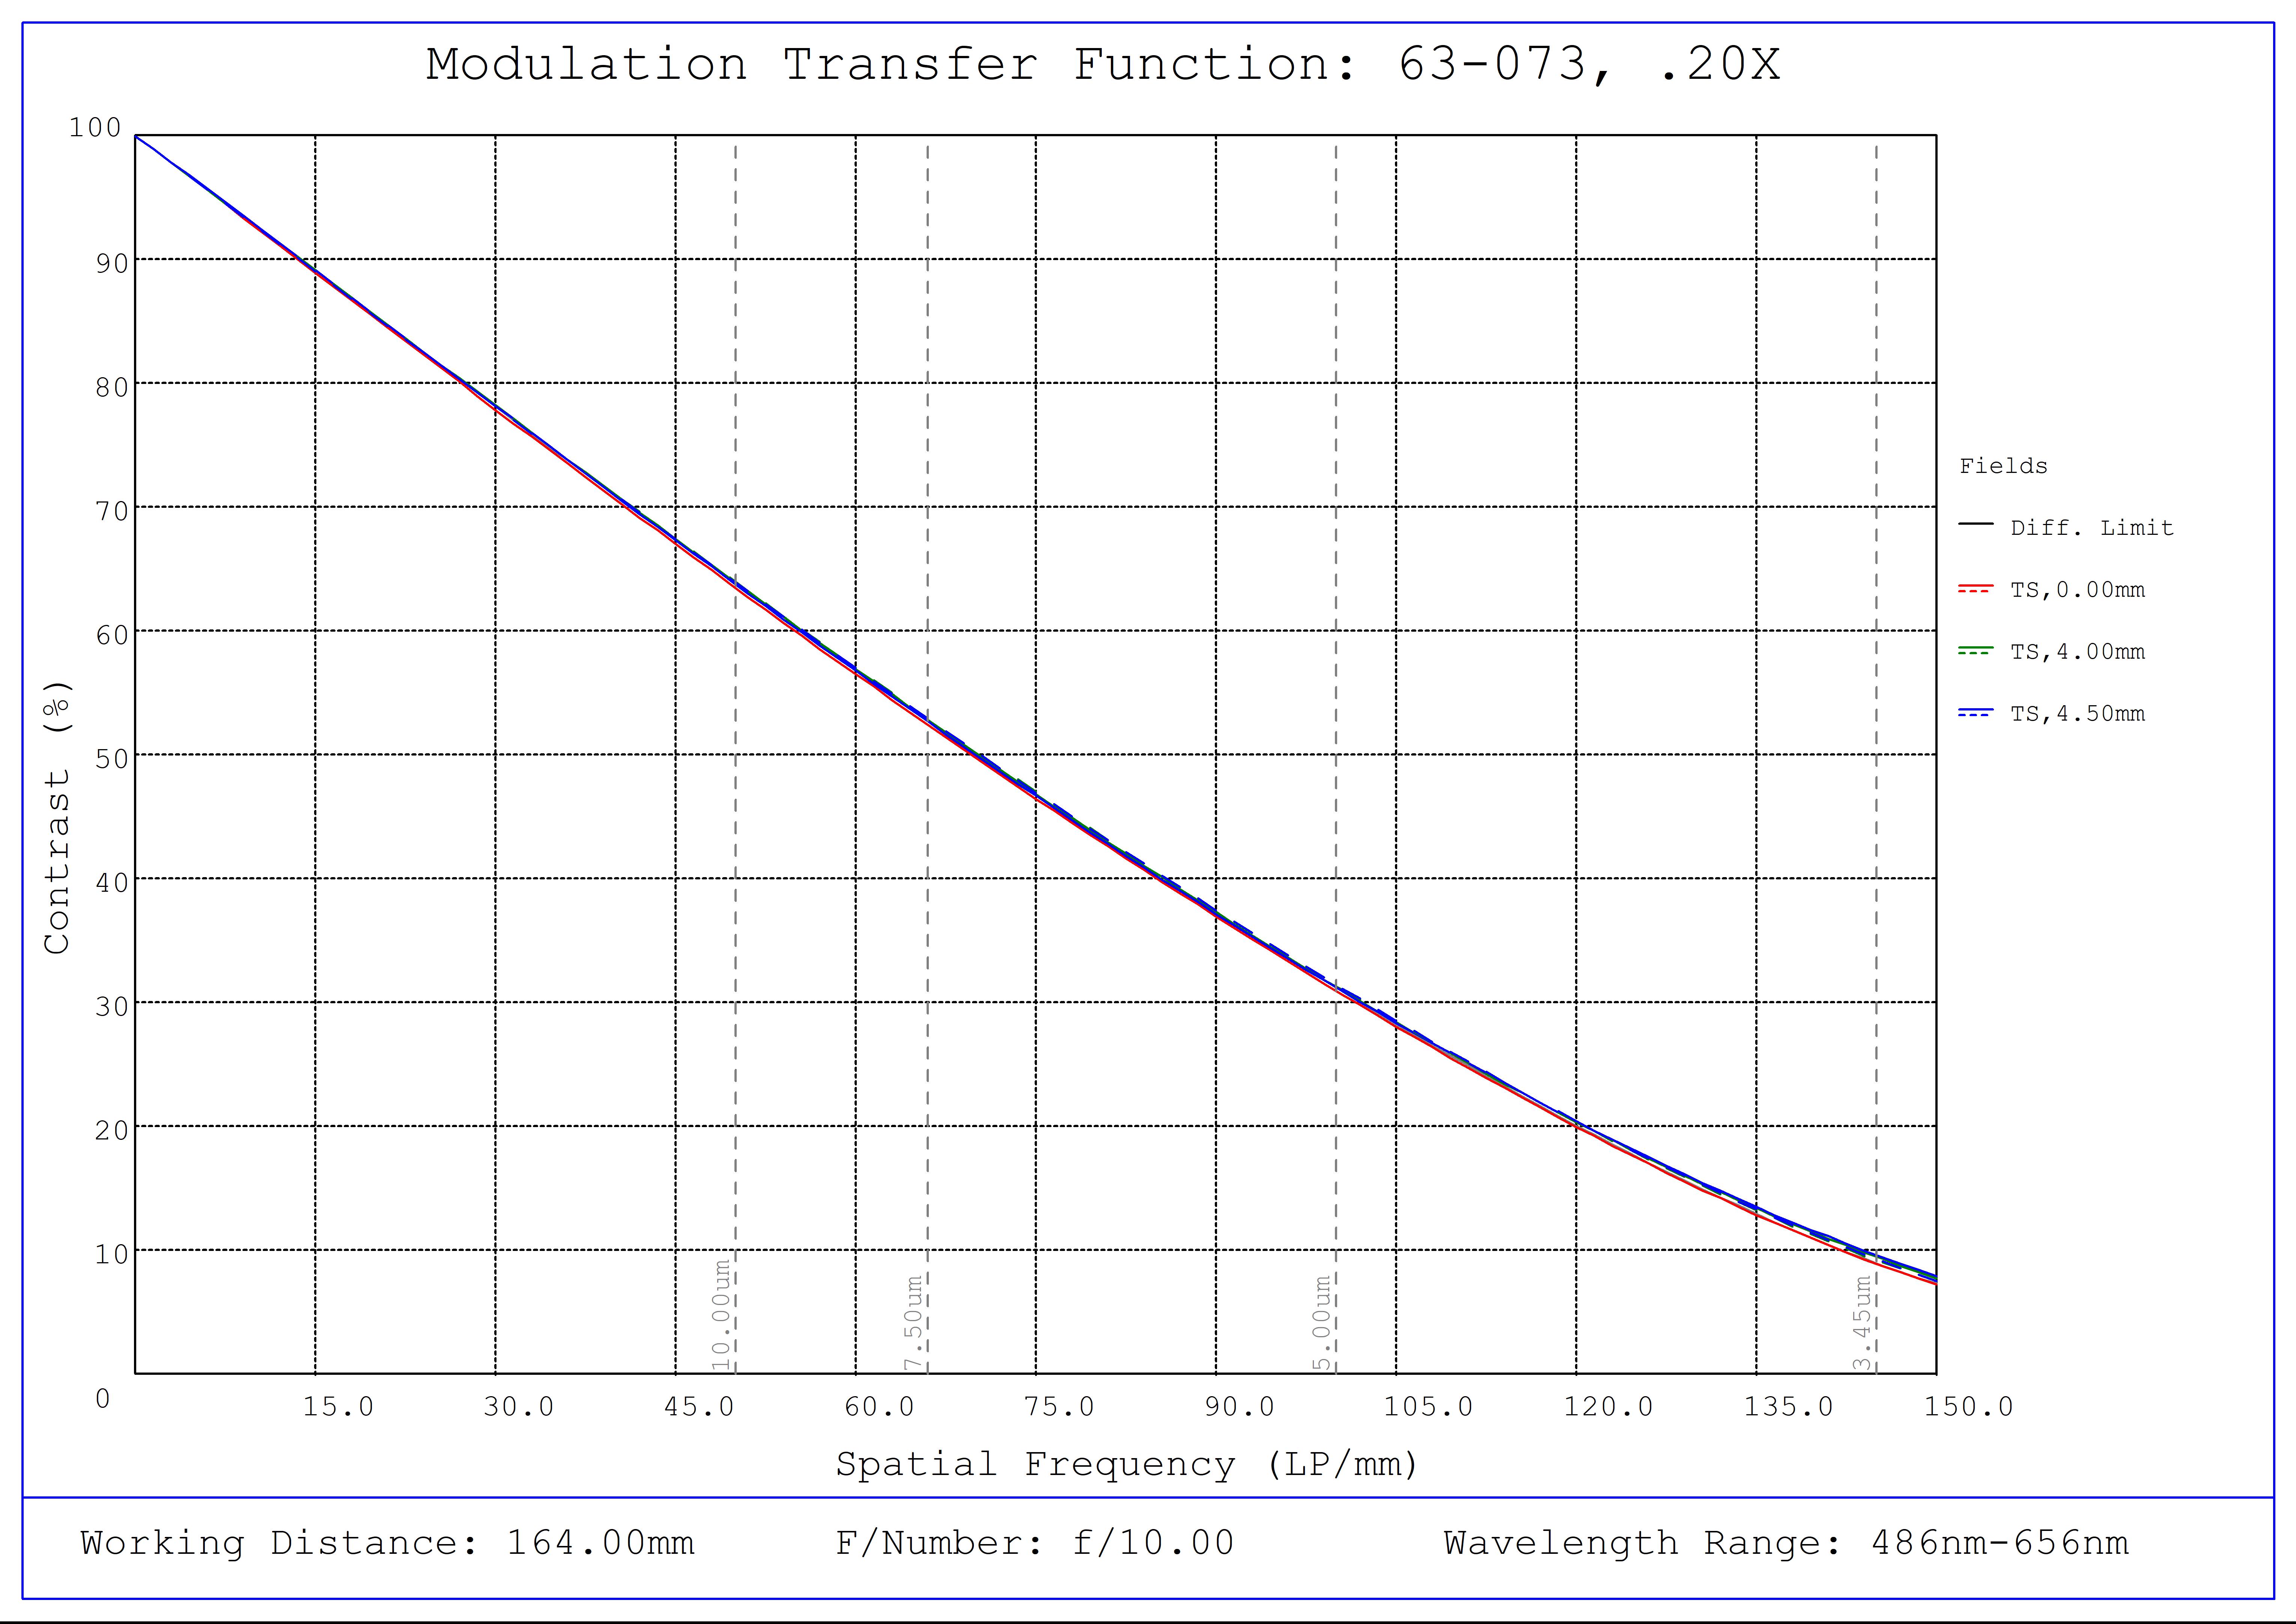 #63-073, 0.20X SilverTL™ Telecentric Lens, Modulated Transfer Function (MTF) Plot, 164mm Working Distance, f10